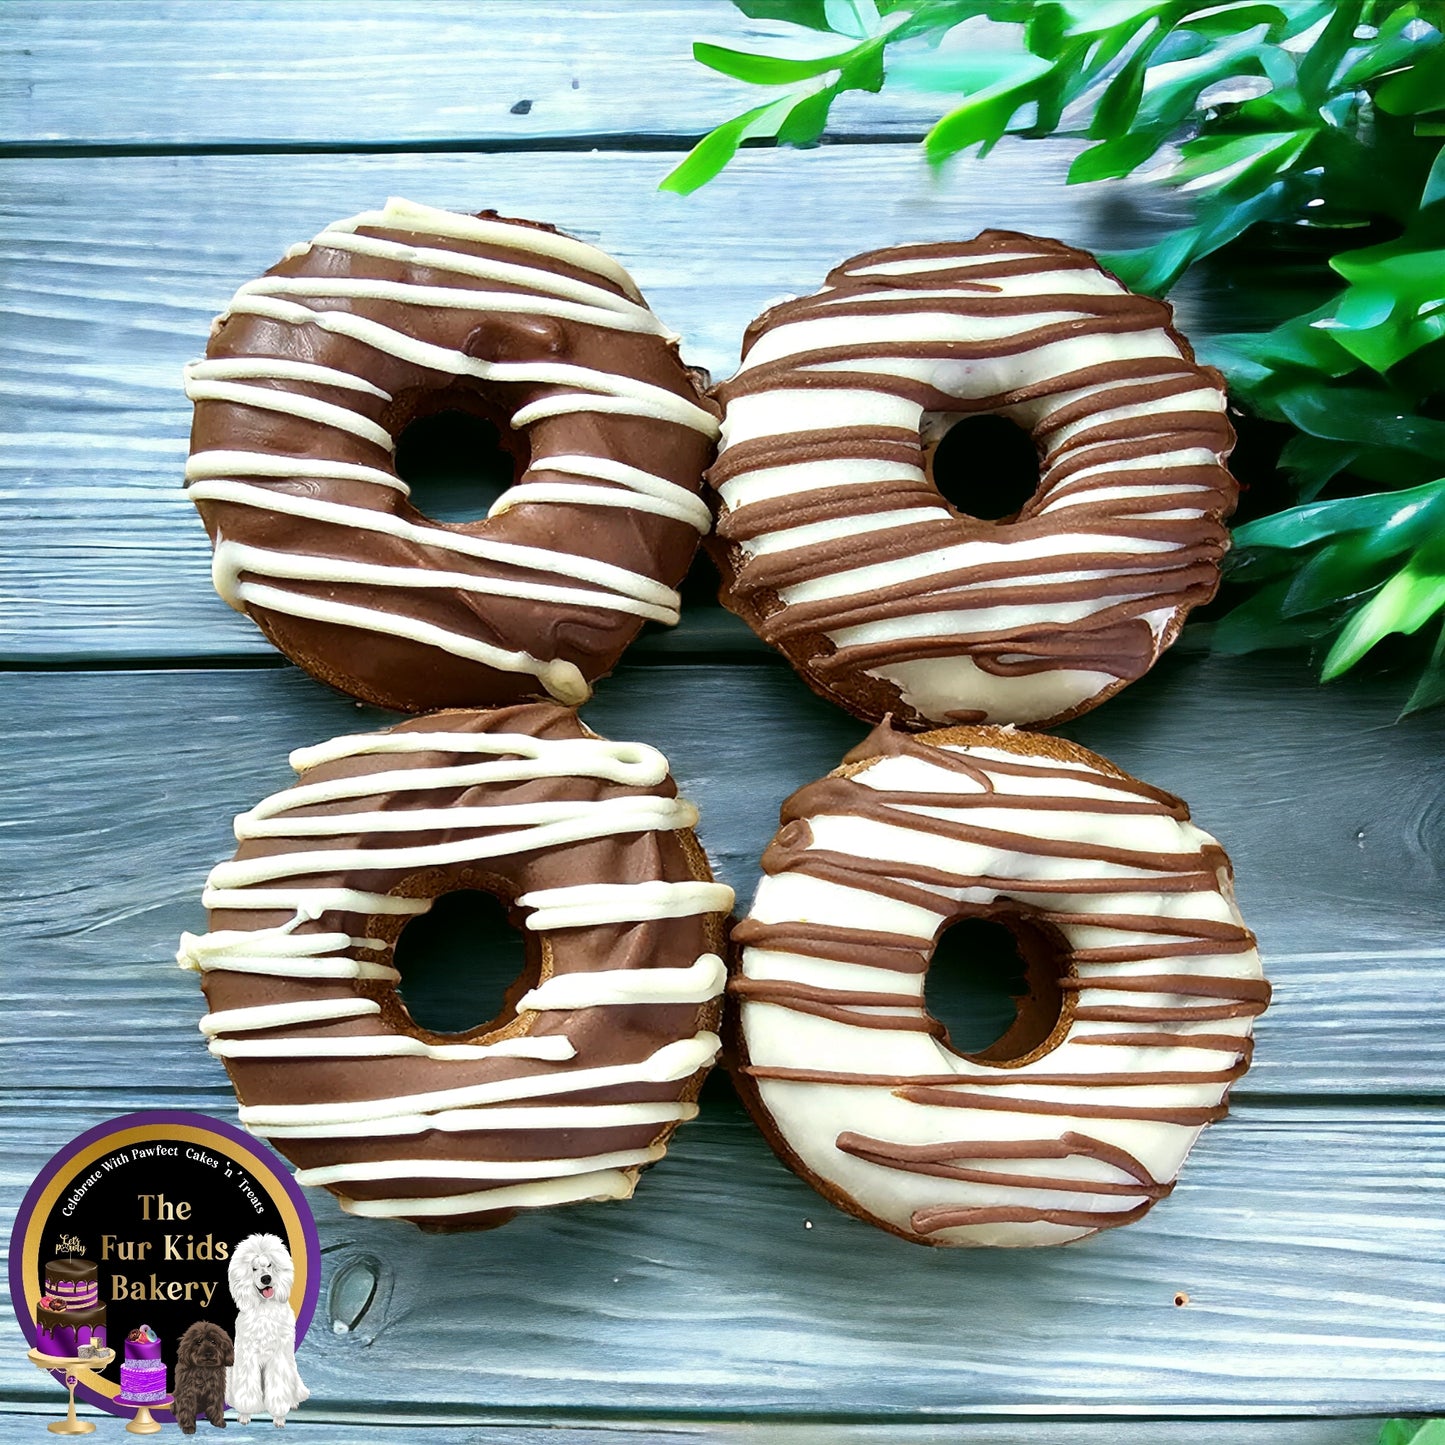 Donuts "Double Trouble"- Donut forget these!